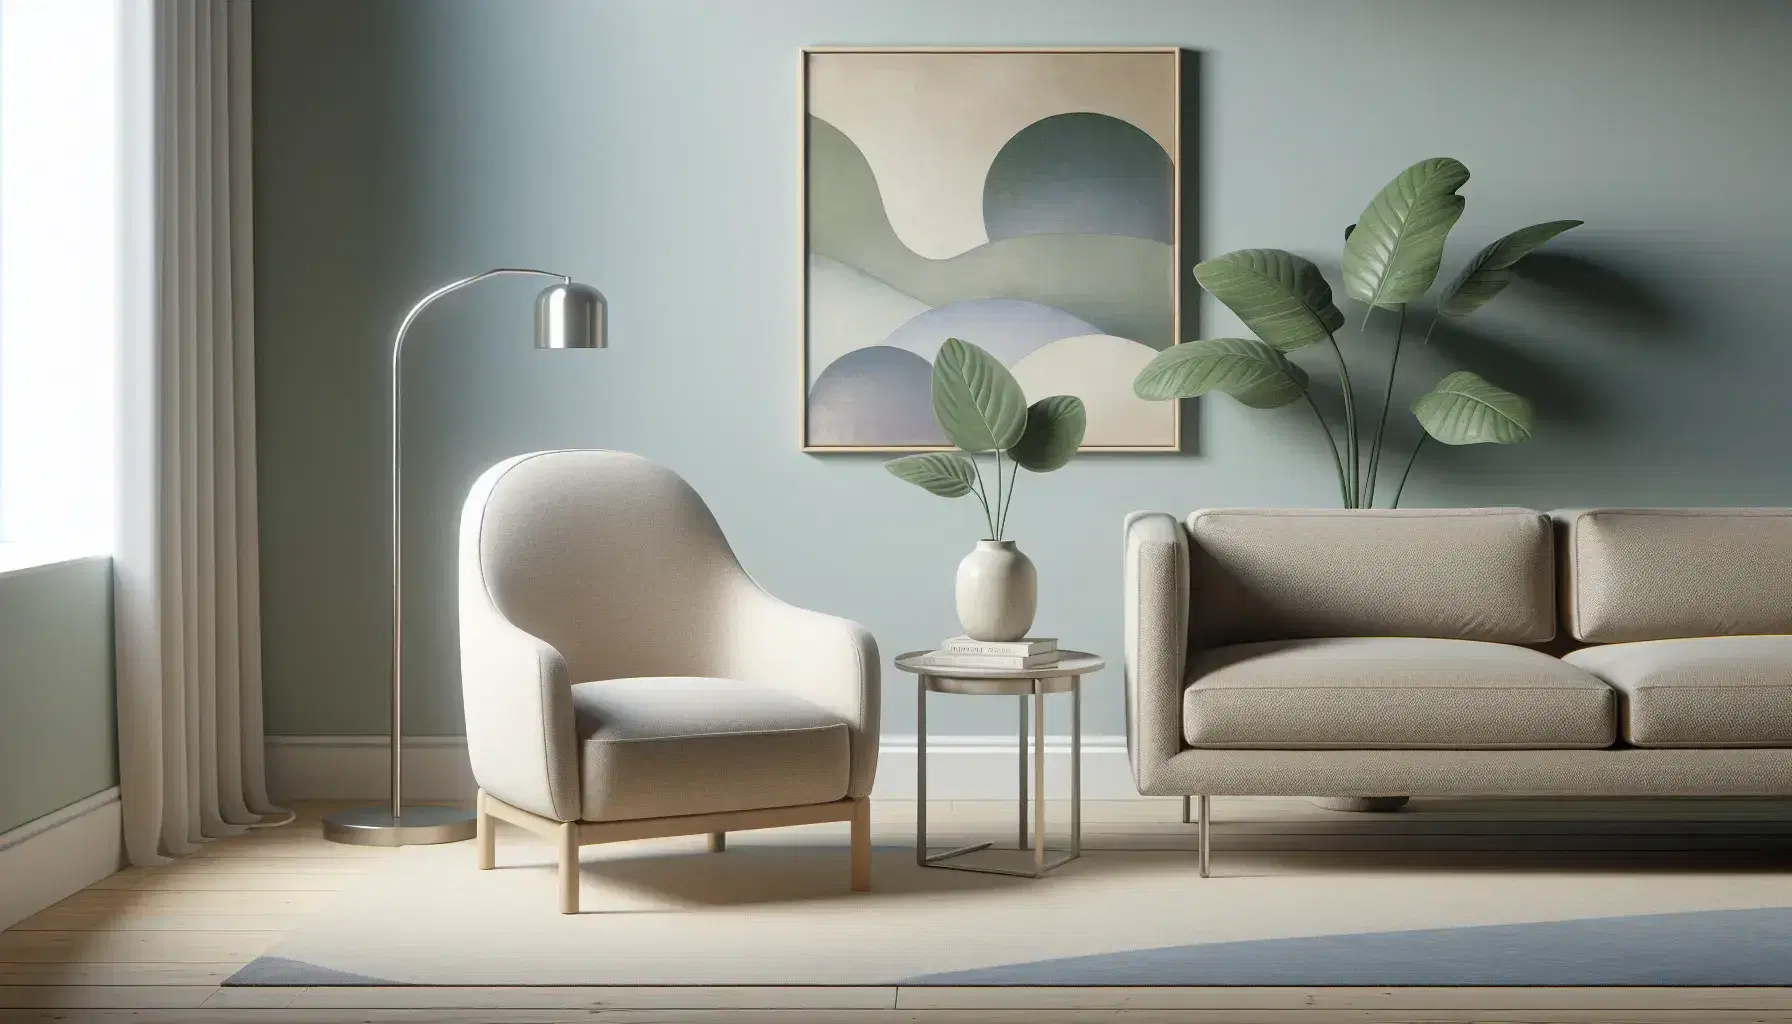 Serene therapy room with beige armchair, matching sofa, coffee table with green plant, floor lamp, abstract art and bright window.